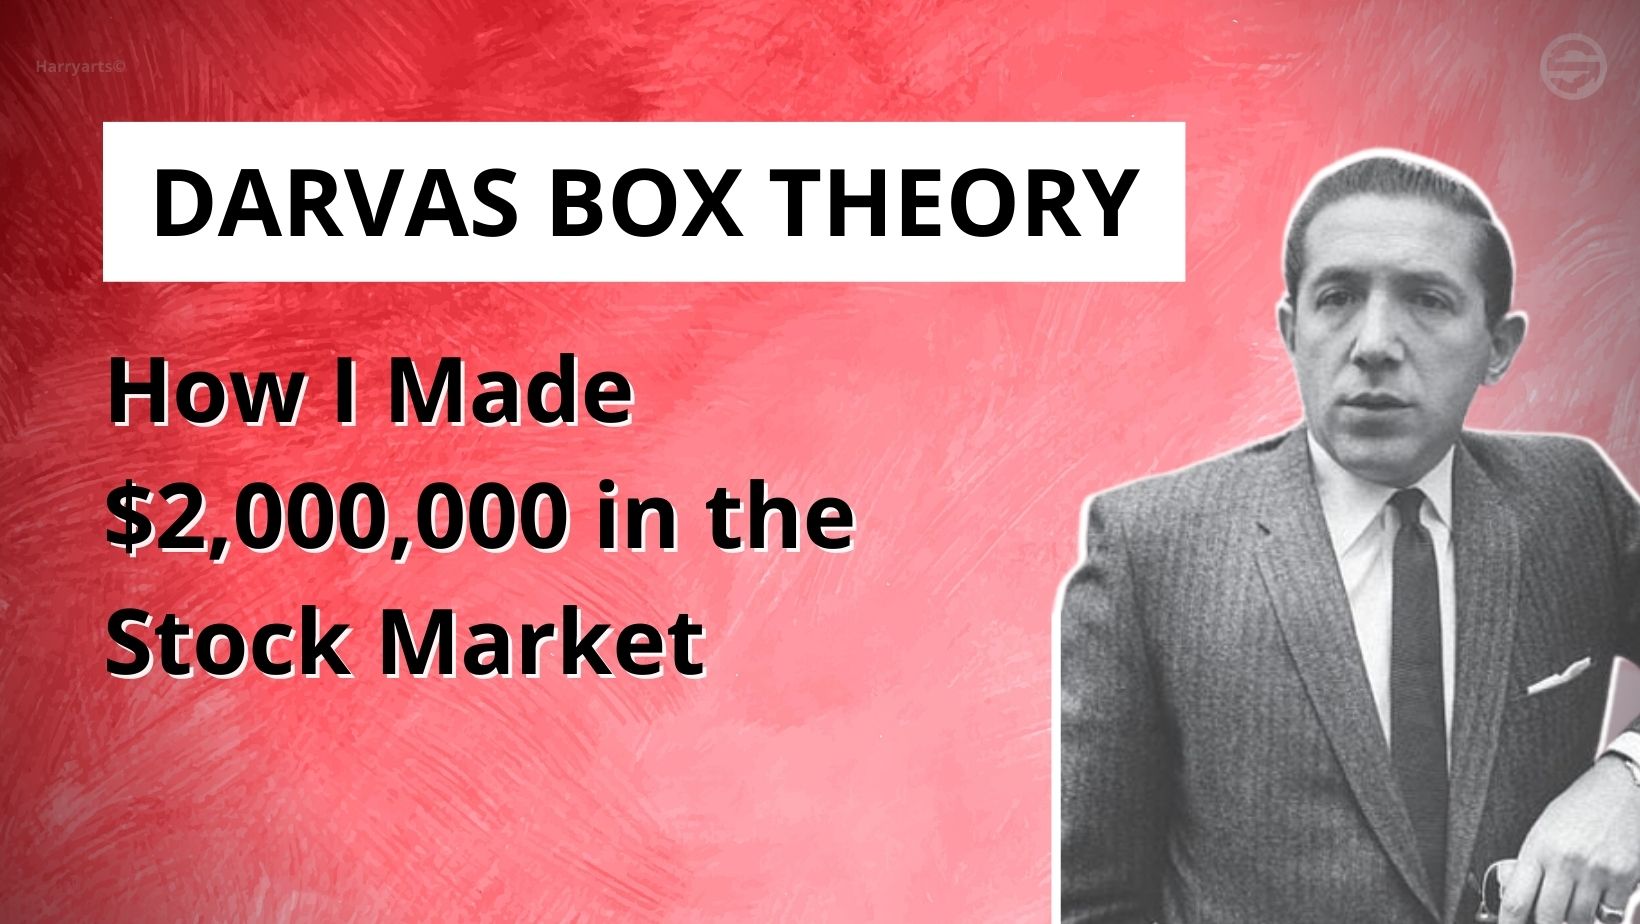 Nicholas Darvas: From dance to stock market success, the fascinating story of a trader